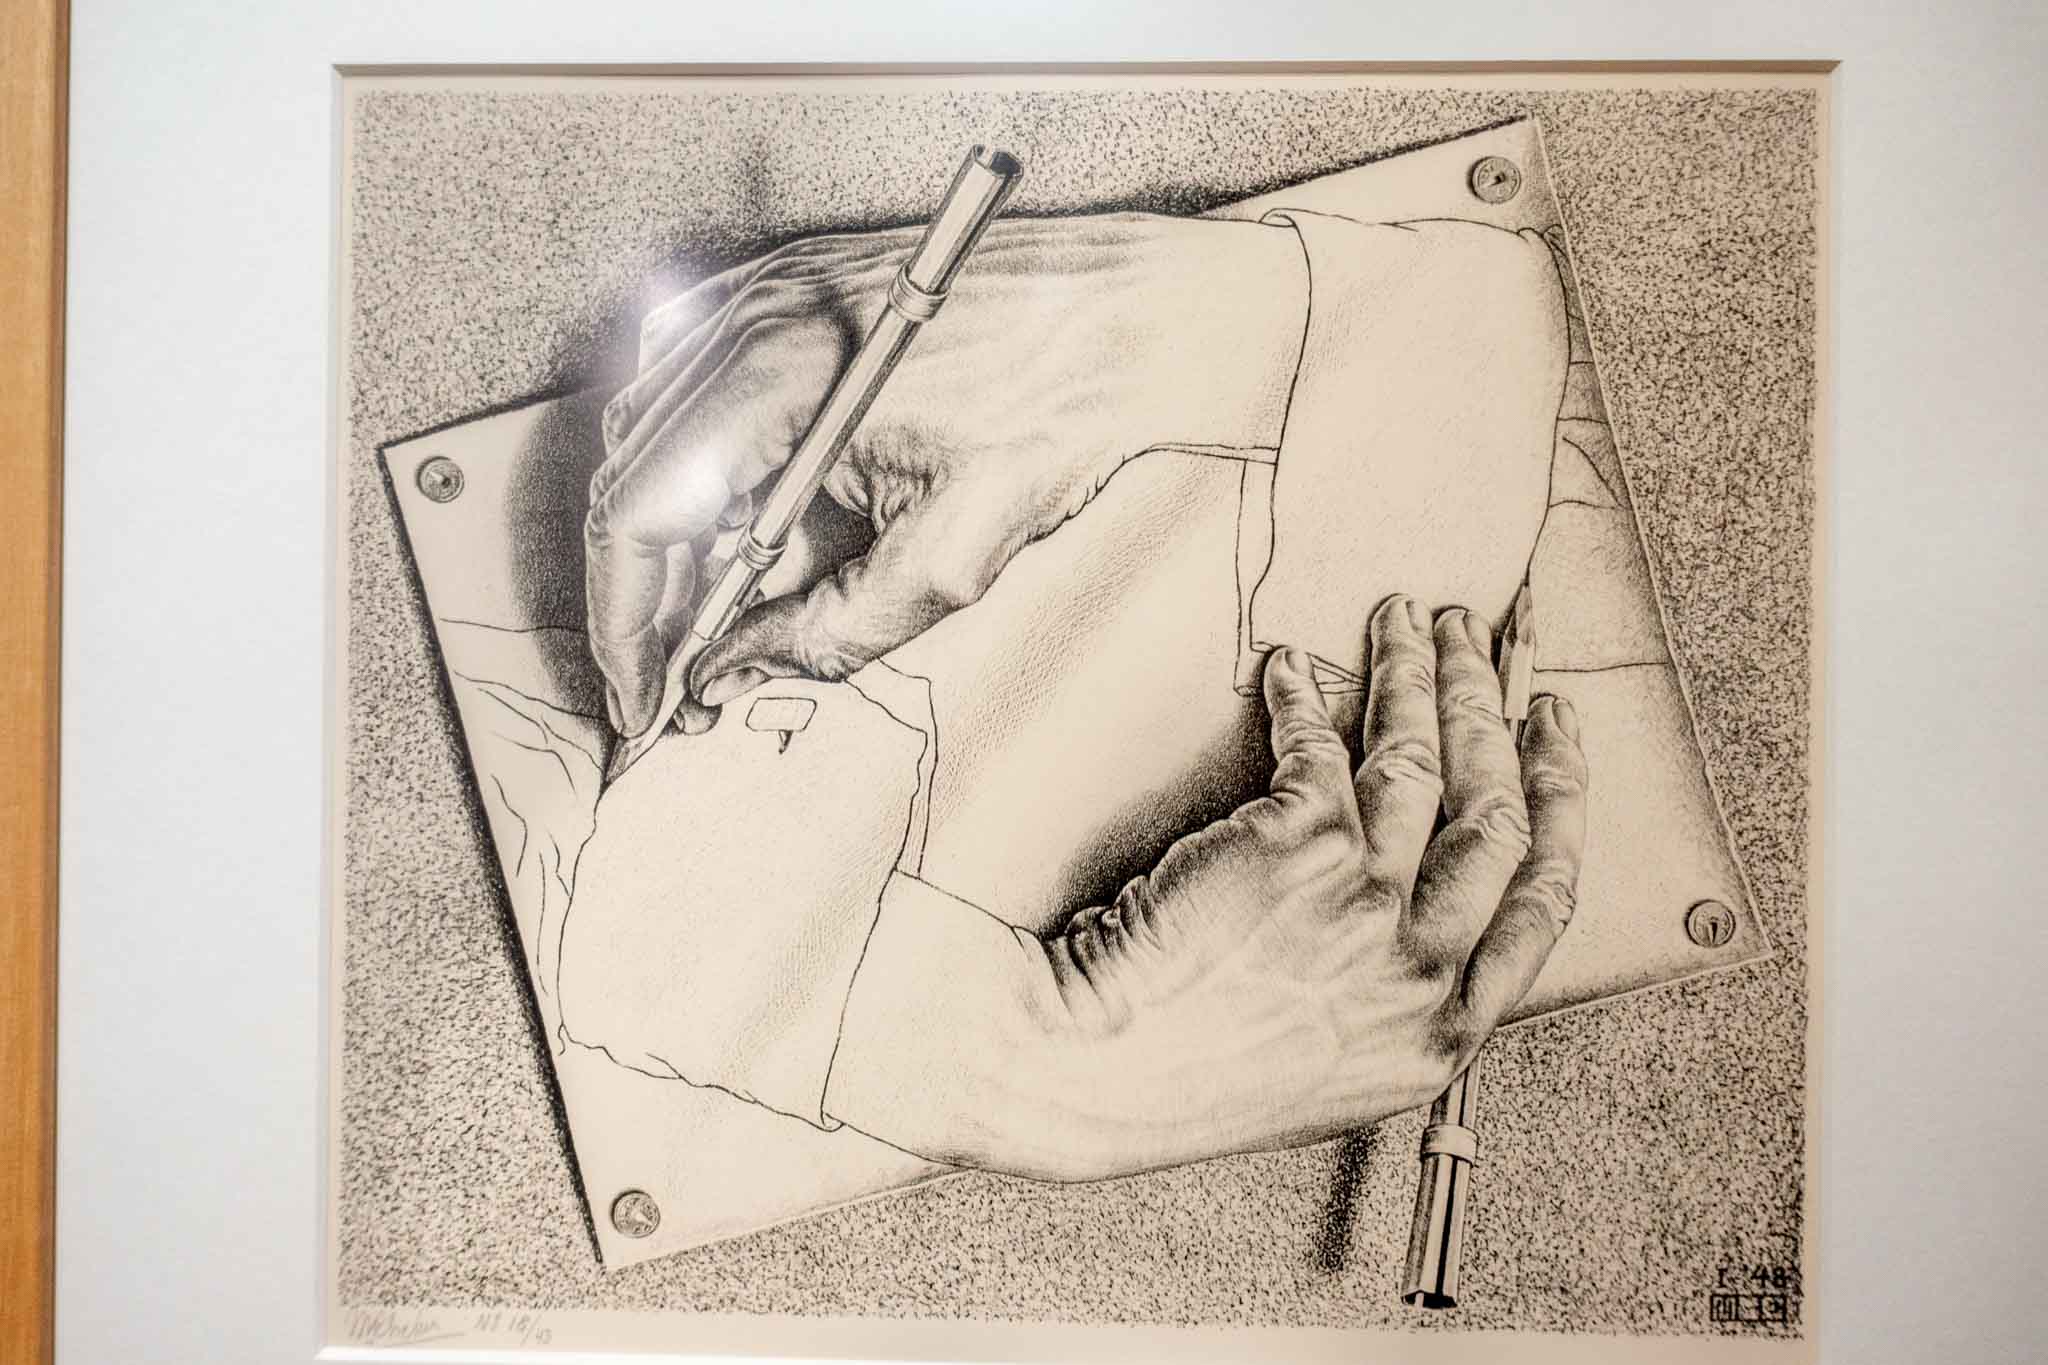 Artwork of two hands drawing each other